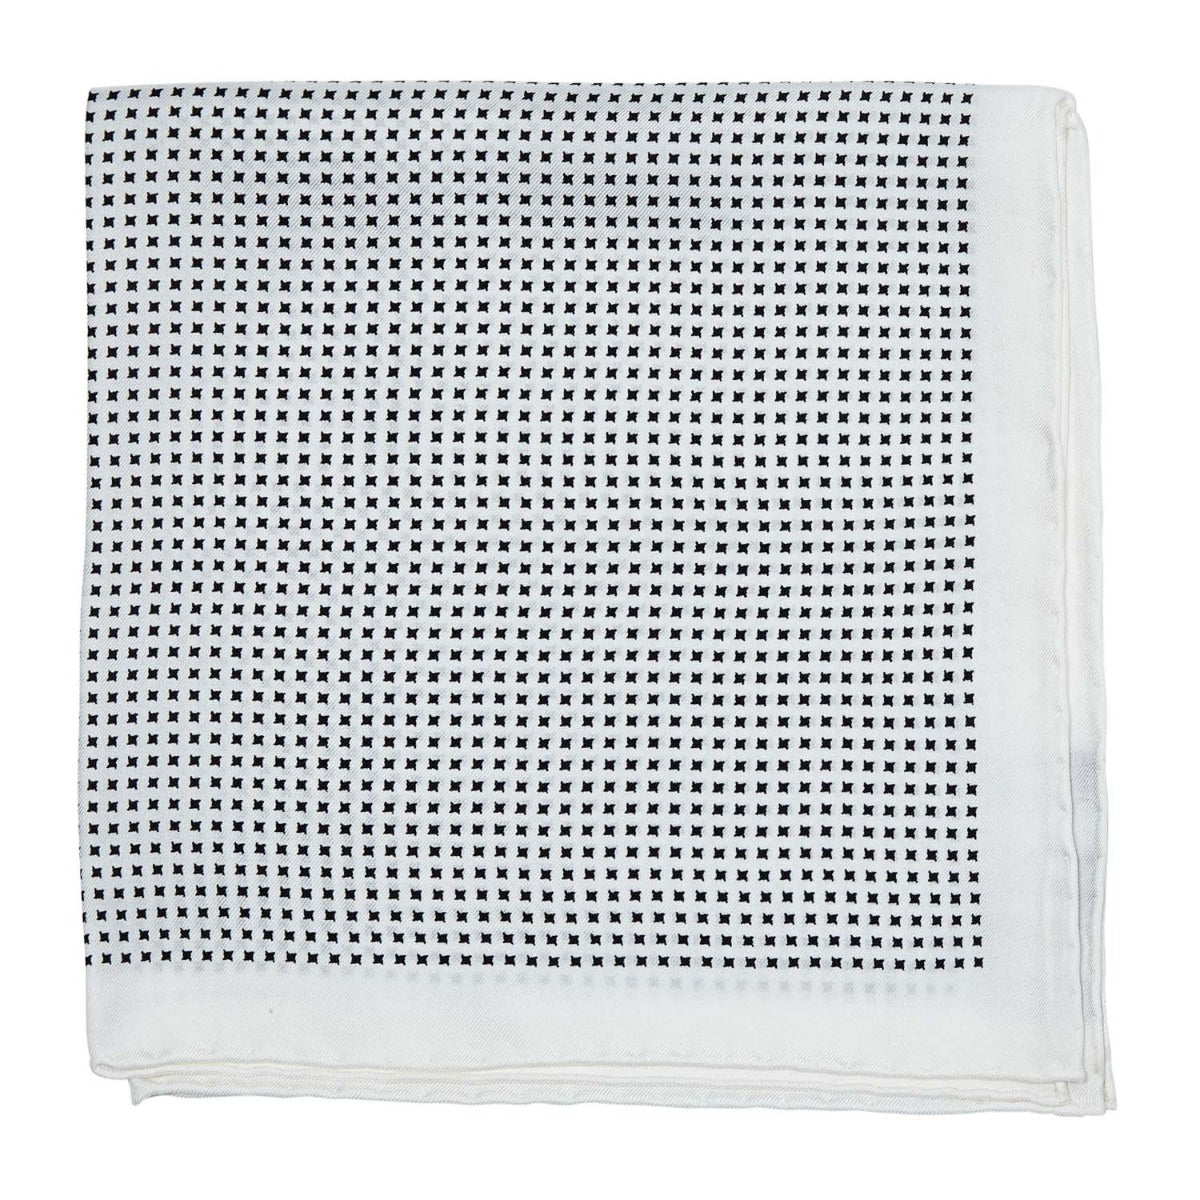 A formal Sovereign Grade 100% Silk White Repeating Black Star pocket square adorned with black dots to enhance your wardrobe, available at KirbyAllison.com.